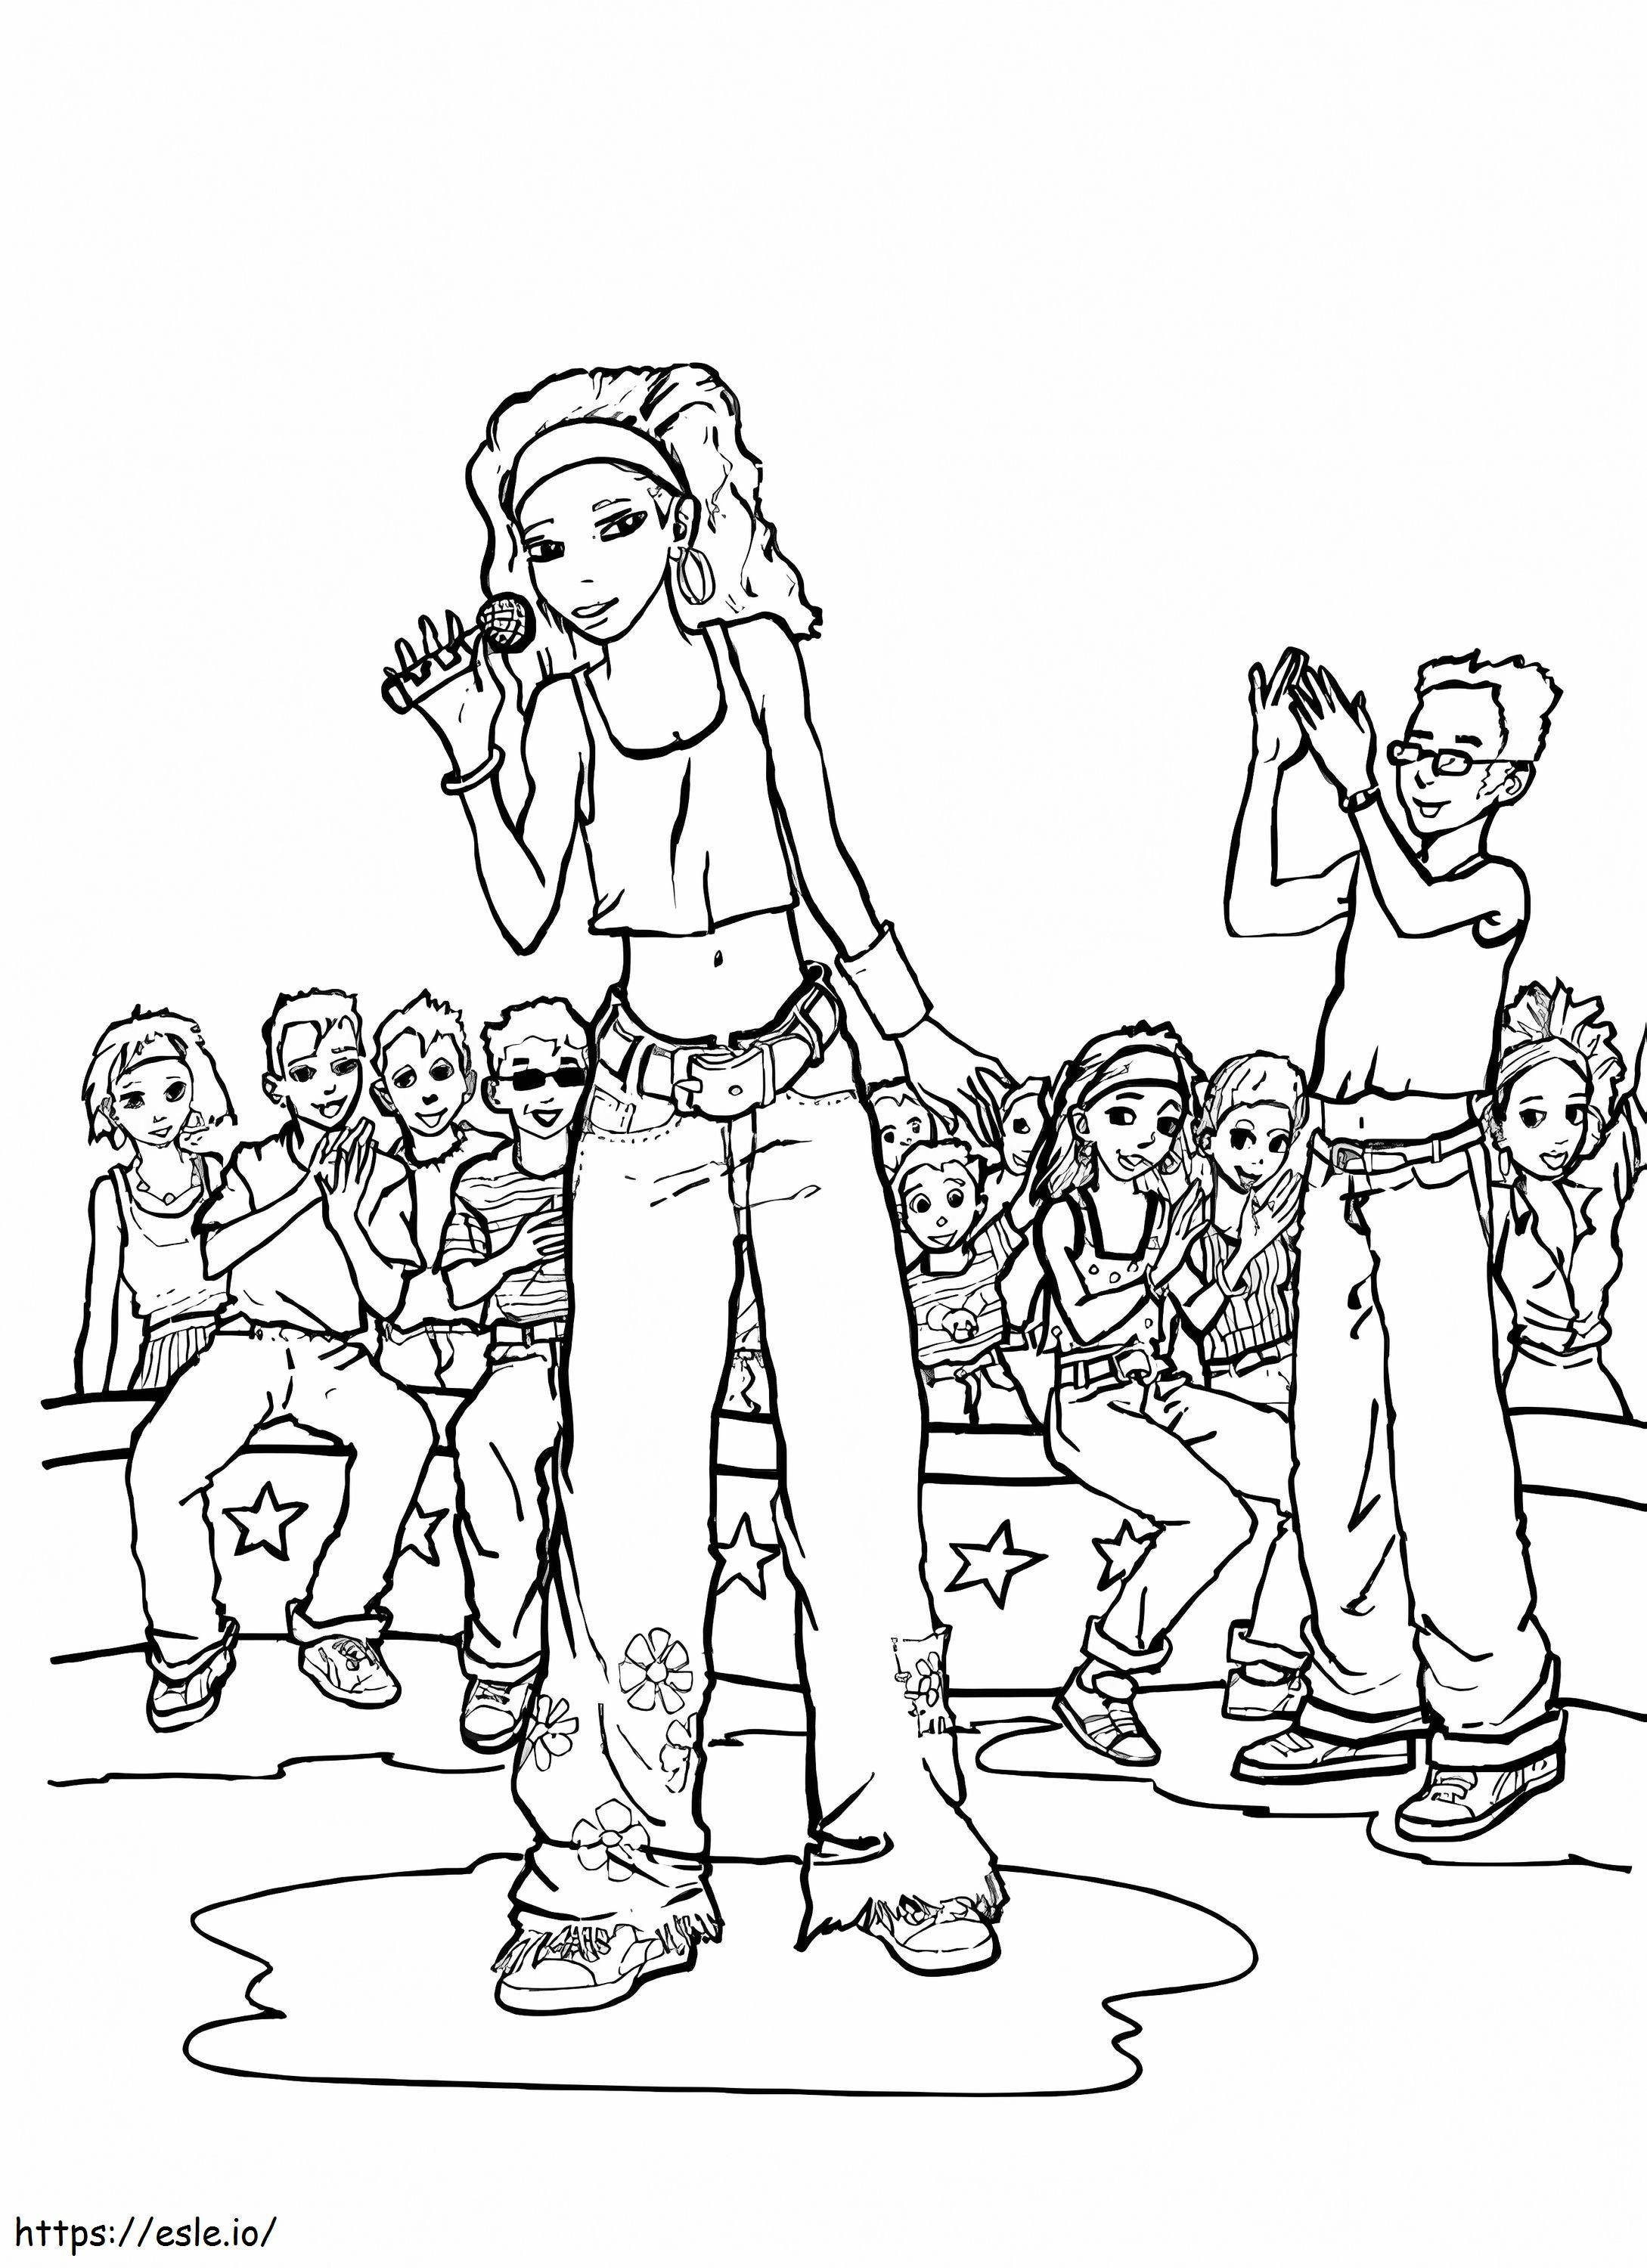 Rockstar On Stage coloring page